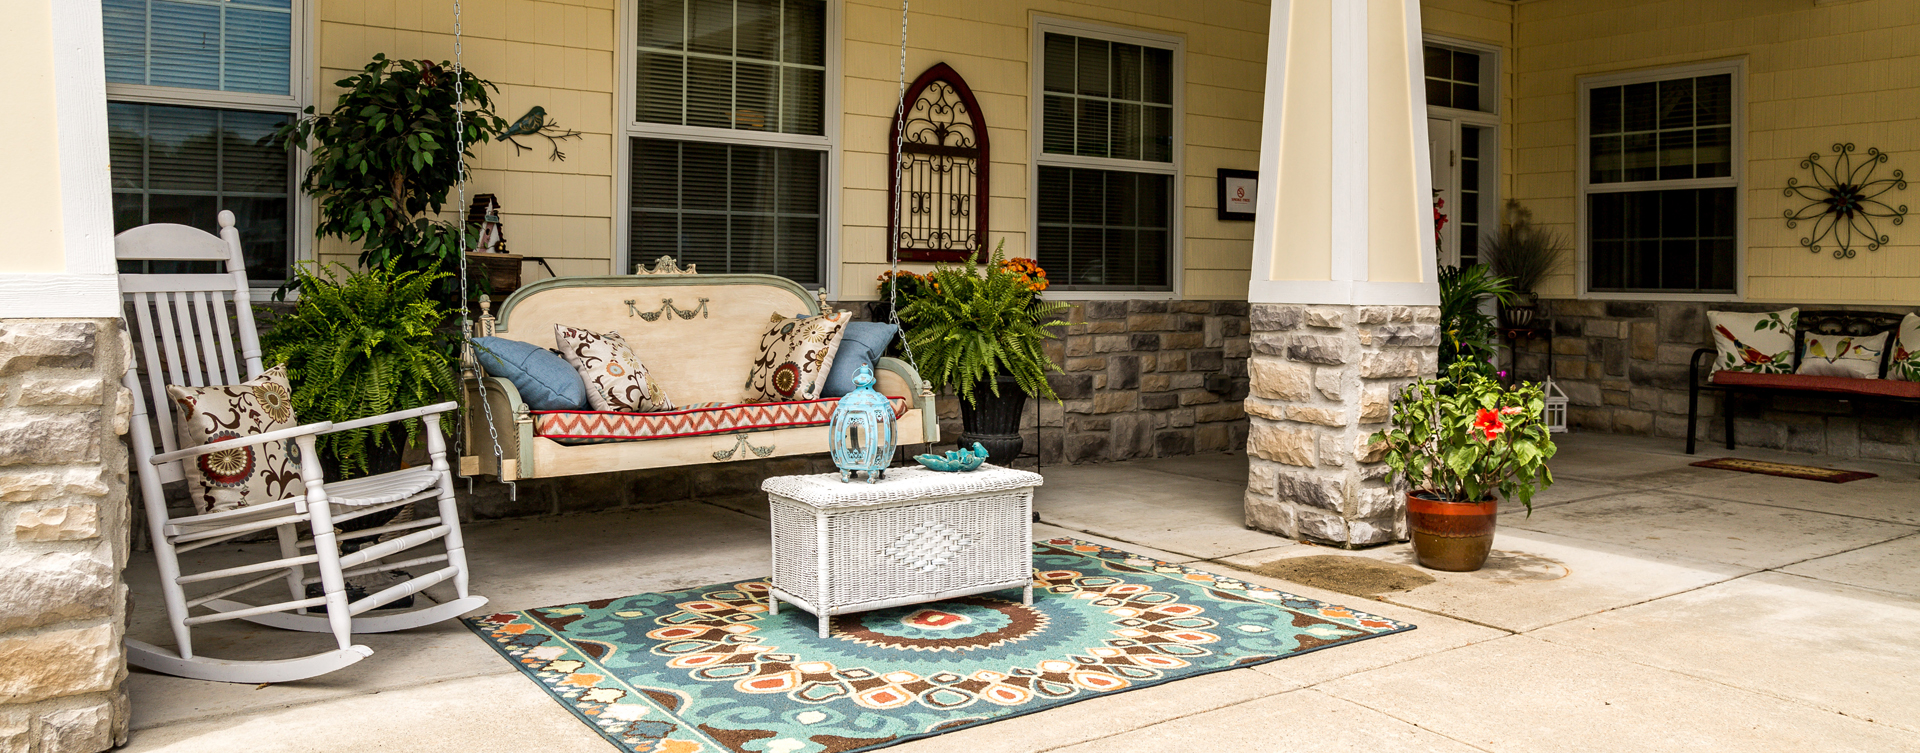 Relax in your favorite chair on the porch at Bickford of Battle Creek